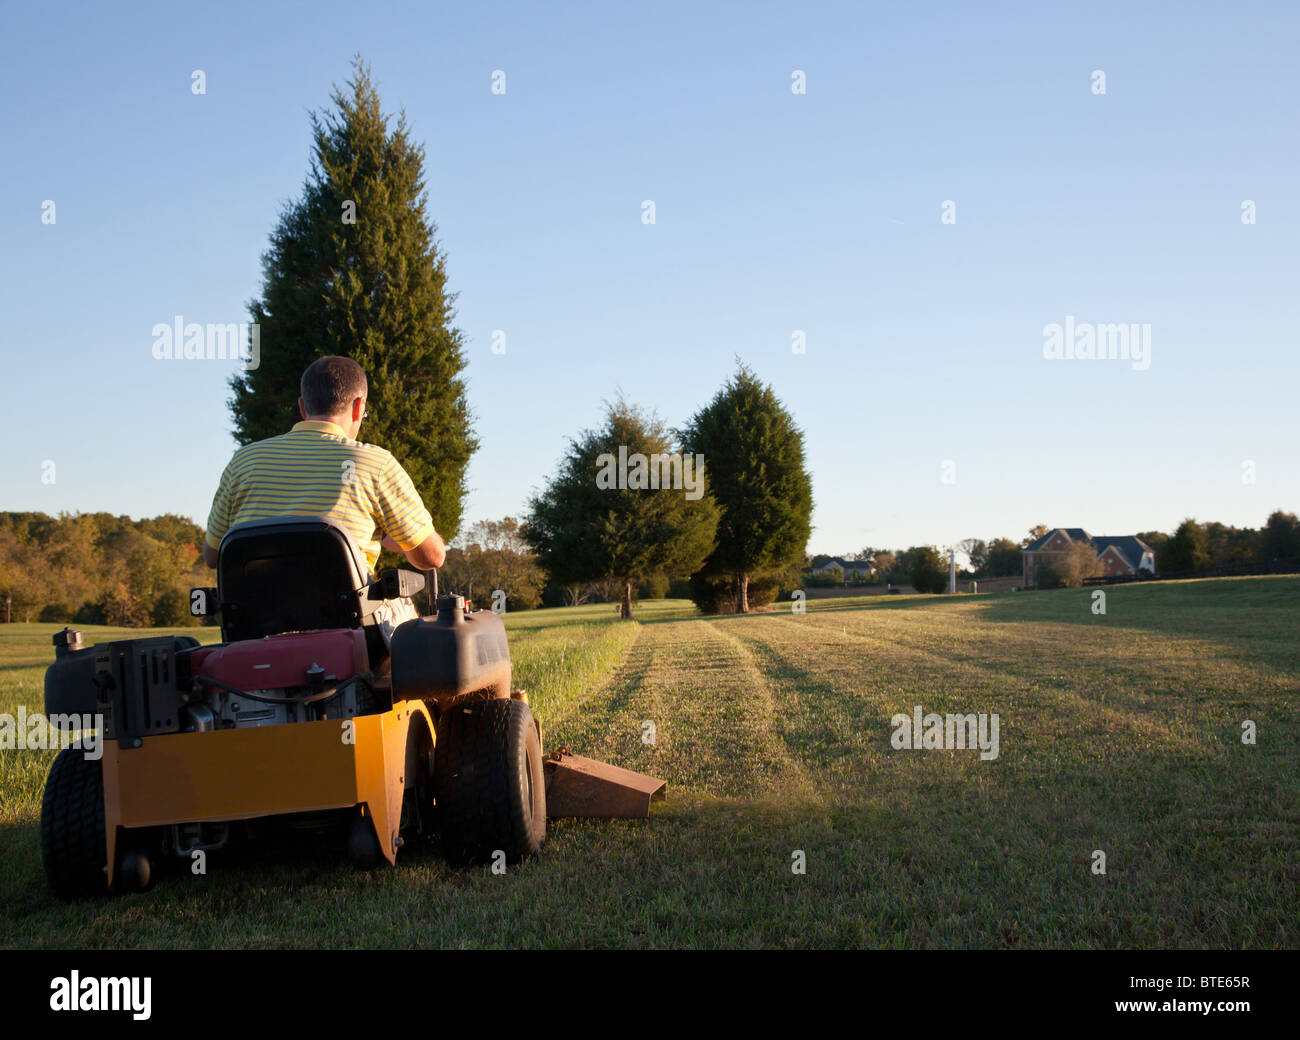 Middle aged man on zero turn mower cutting grass on a sunny day with the sun low in the sky Stock Photo